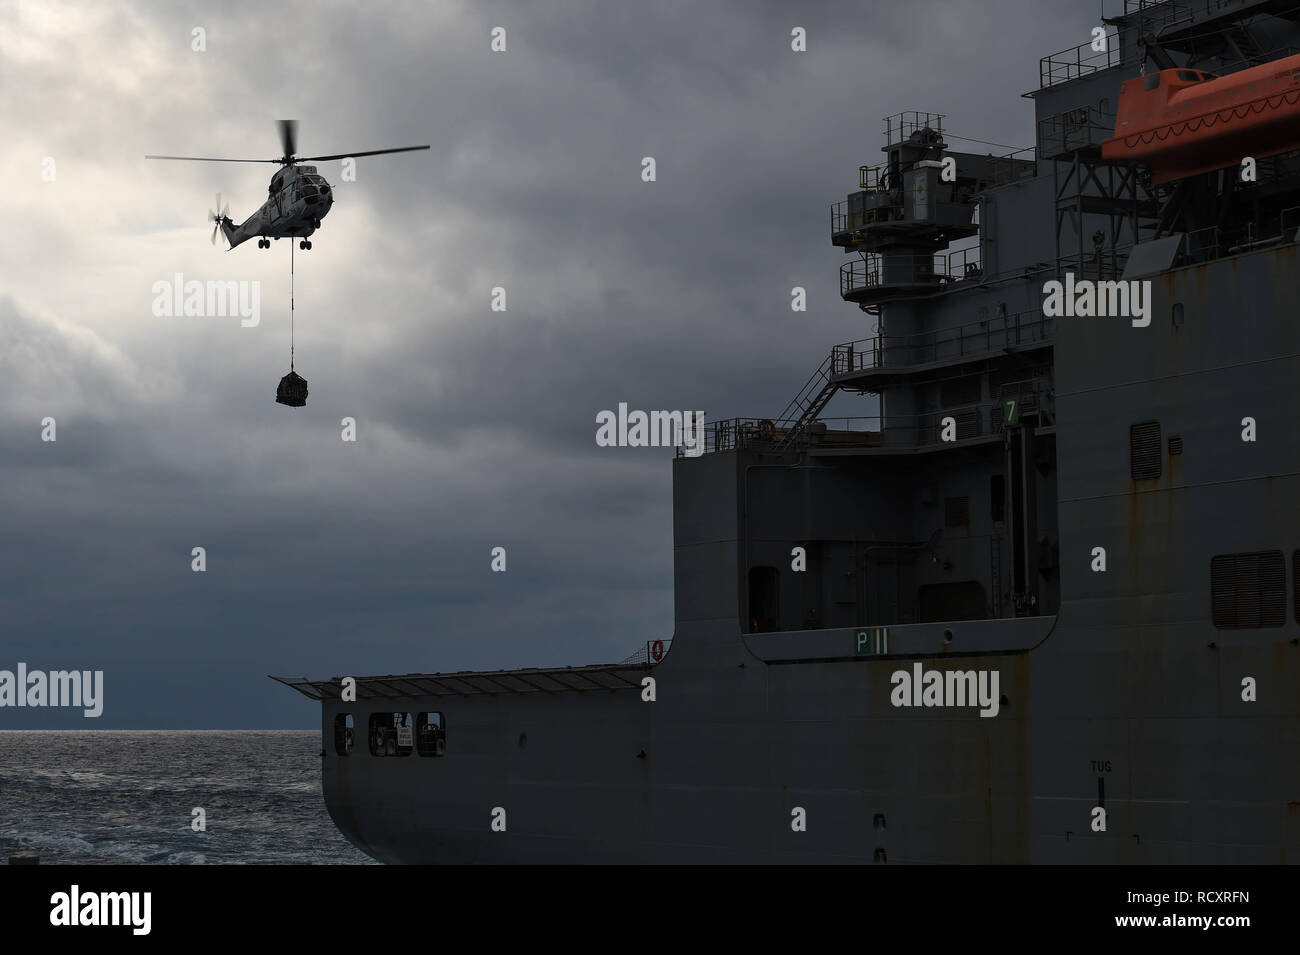 190111-N-VE240-3256 WATERS SOUTH OF JAPAN (Jan. 11, 2019) An SA 330 Puma conducts vertical replenishment drills aboard the dry cargo and ammunition ship USNS Wally Schirra (T-AKE 8) during a replenishment-at-sea with the Arleigh Burke-class guided-missile destroyer USS Milius (DDG 69). Milius is forward-deployed to the U.S. 7th Fleet area of operations in support of security and stability in the Indo-Pacific region. (U.S. Navy photo by Mass Communication Specialist 1st Class Rufus Hucks/Released) Stock Photo